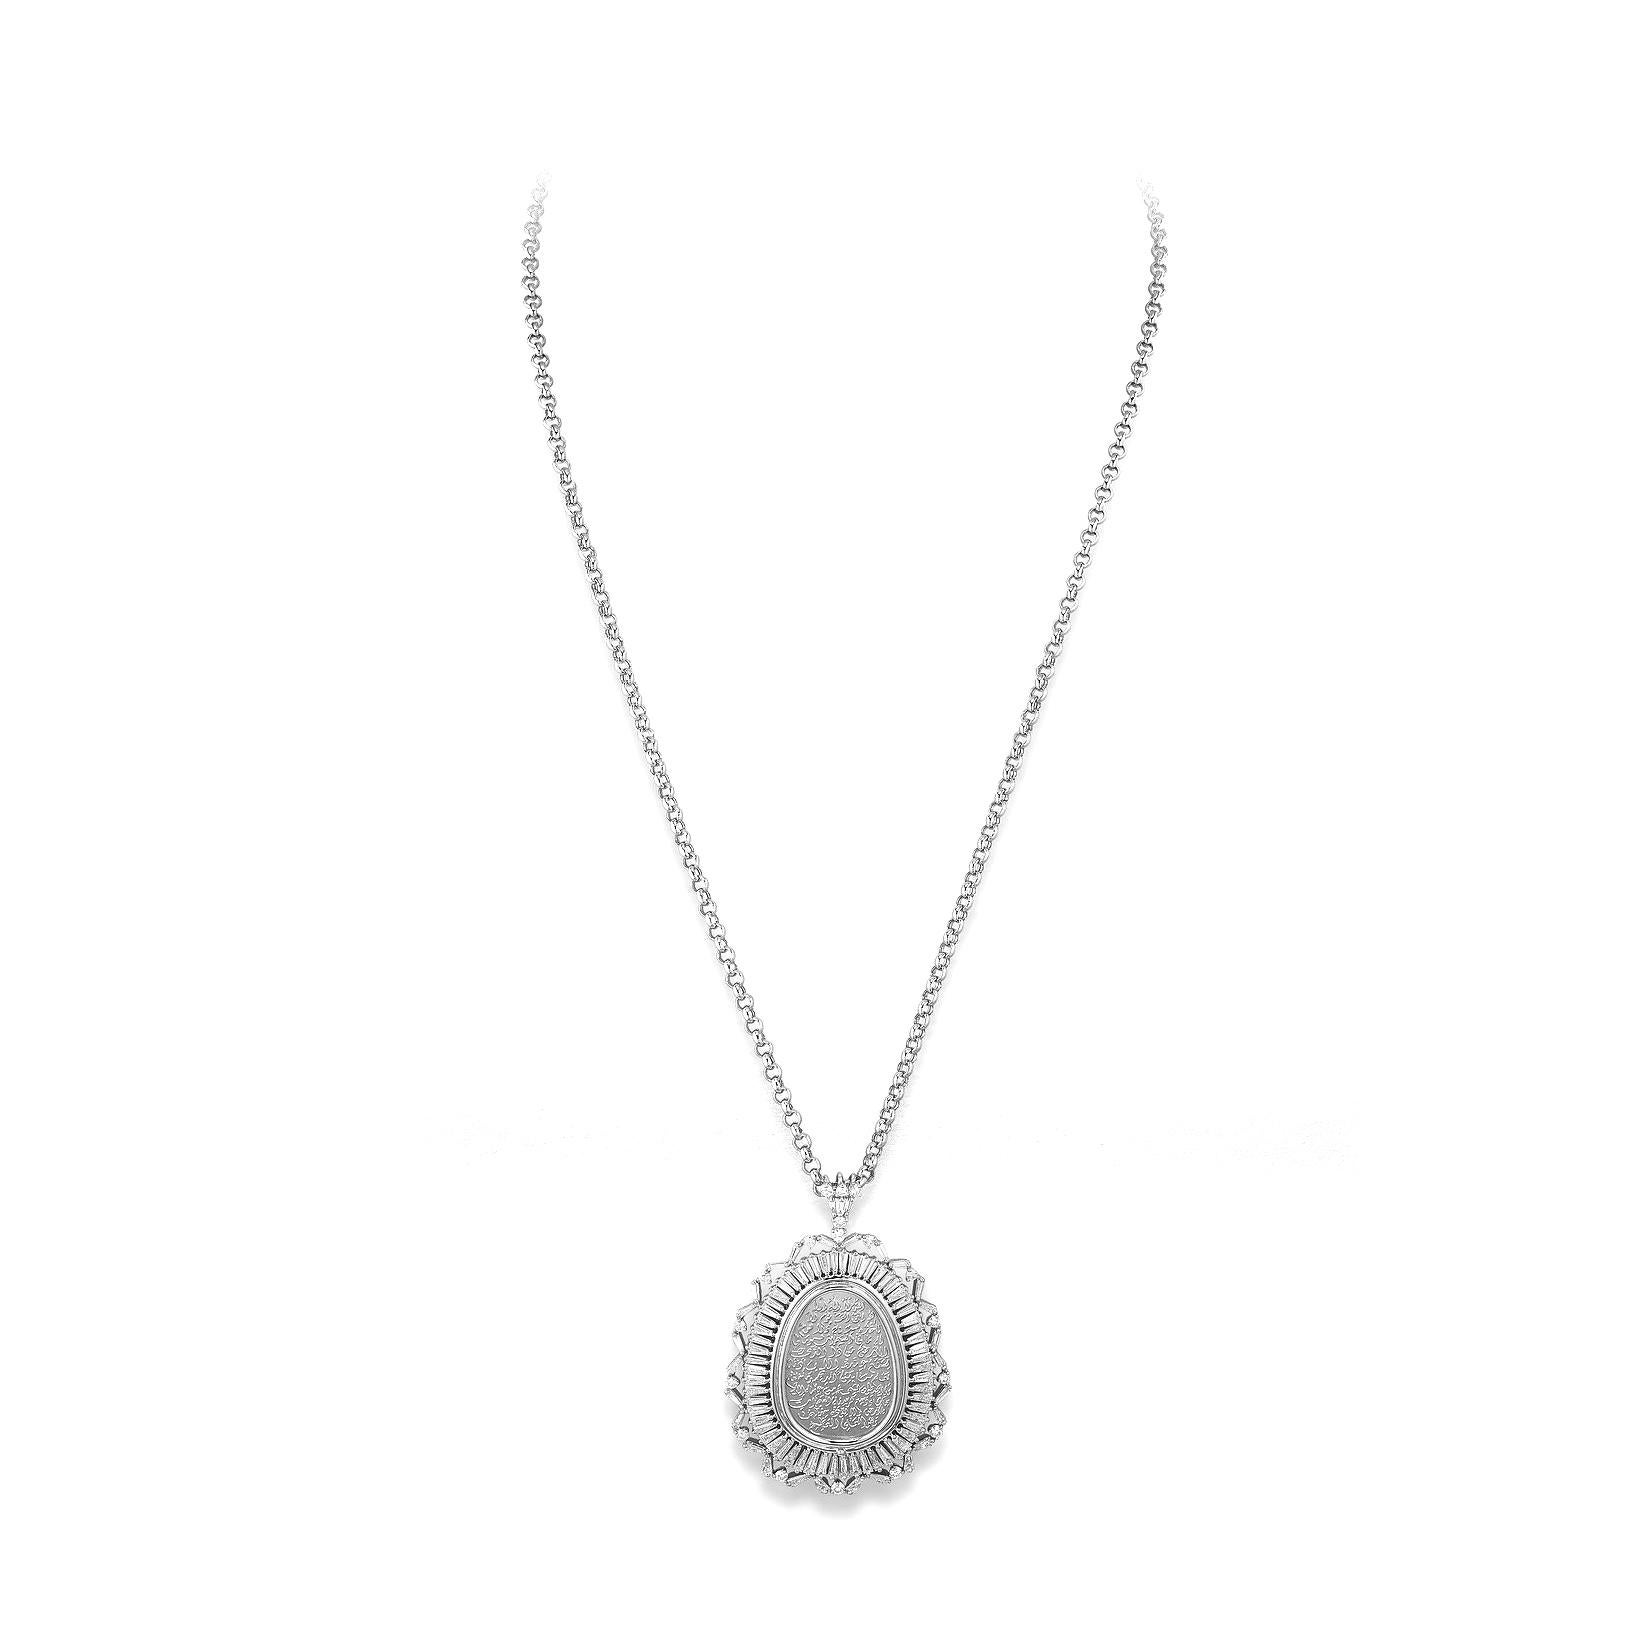 Sourate pendant in 18kt white gold set with 13 diamonds 0.54 cts and 89 tapers cut diamonds 5.97 cts